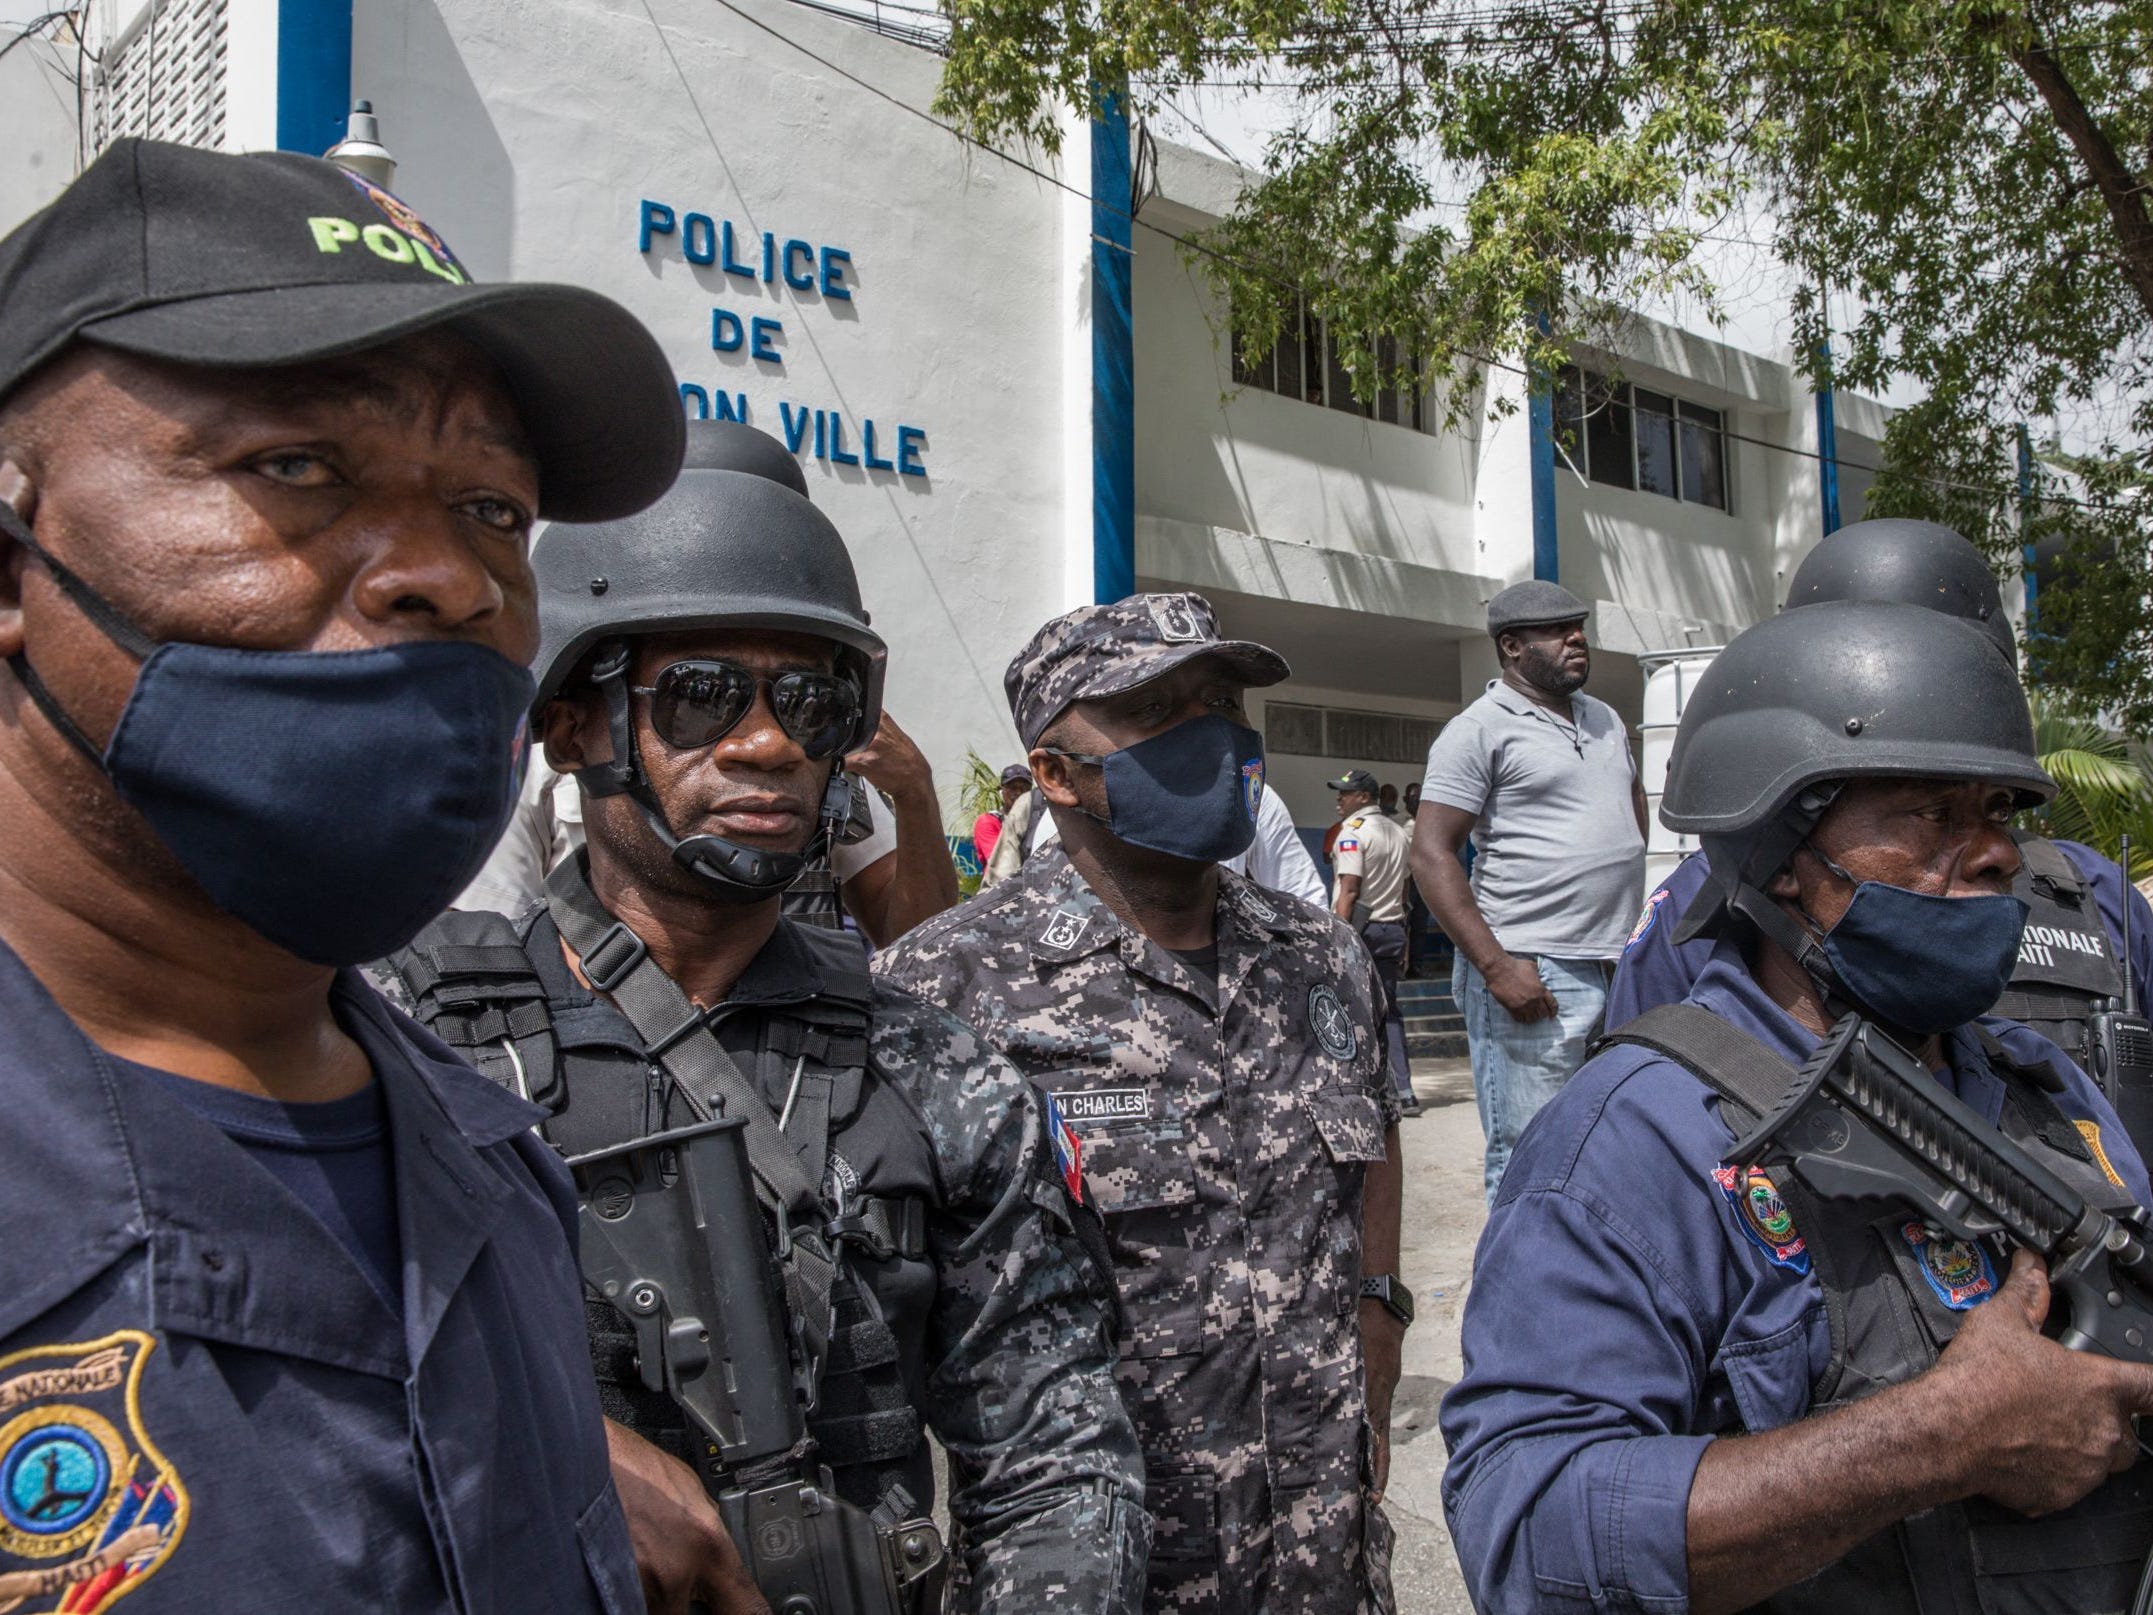 Leon Charles, head of the Police Ntionale of Haiti (C), looks on as the crowd surrounds the Petionville Police station.